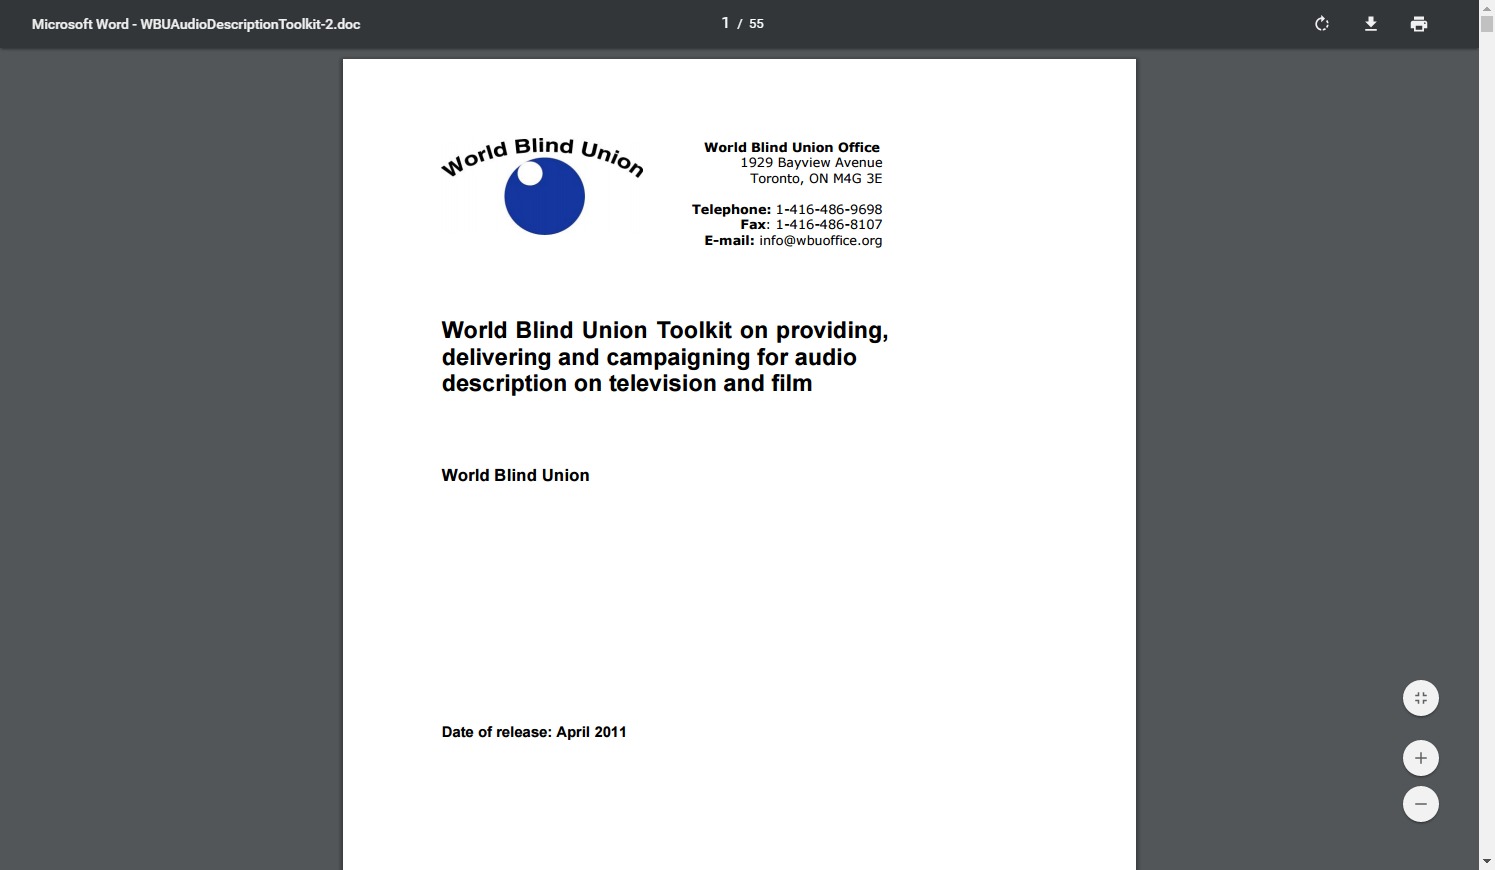 Image from: World Blind Union Toolkit On Providing, Delivering and Campaigning for Audio Description on Television and Film